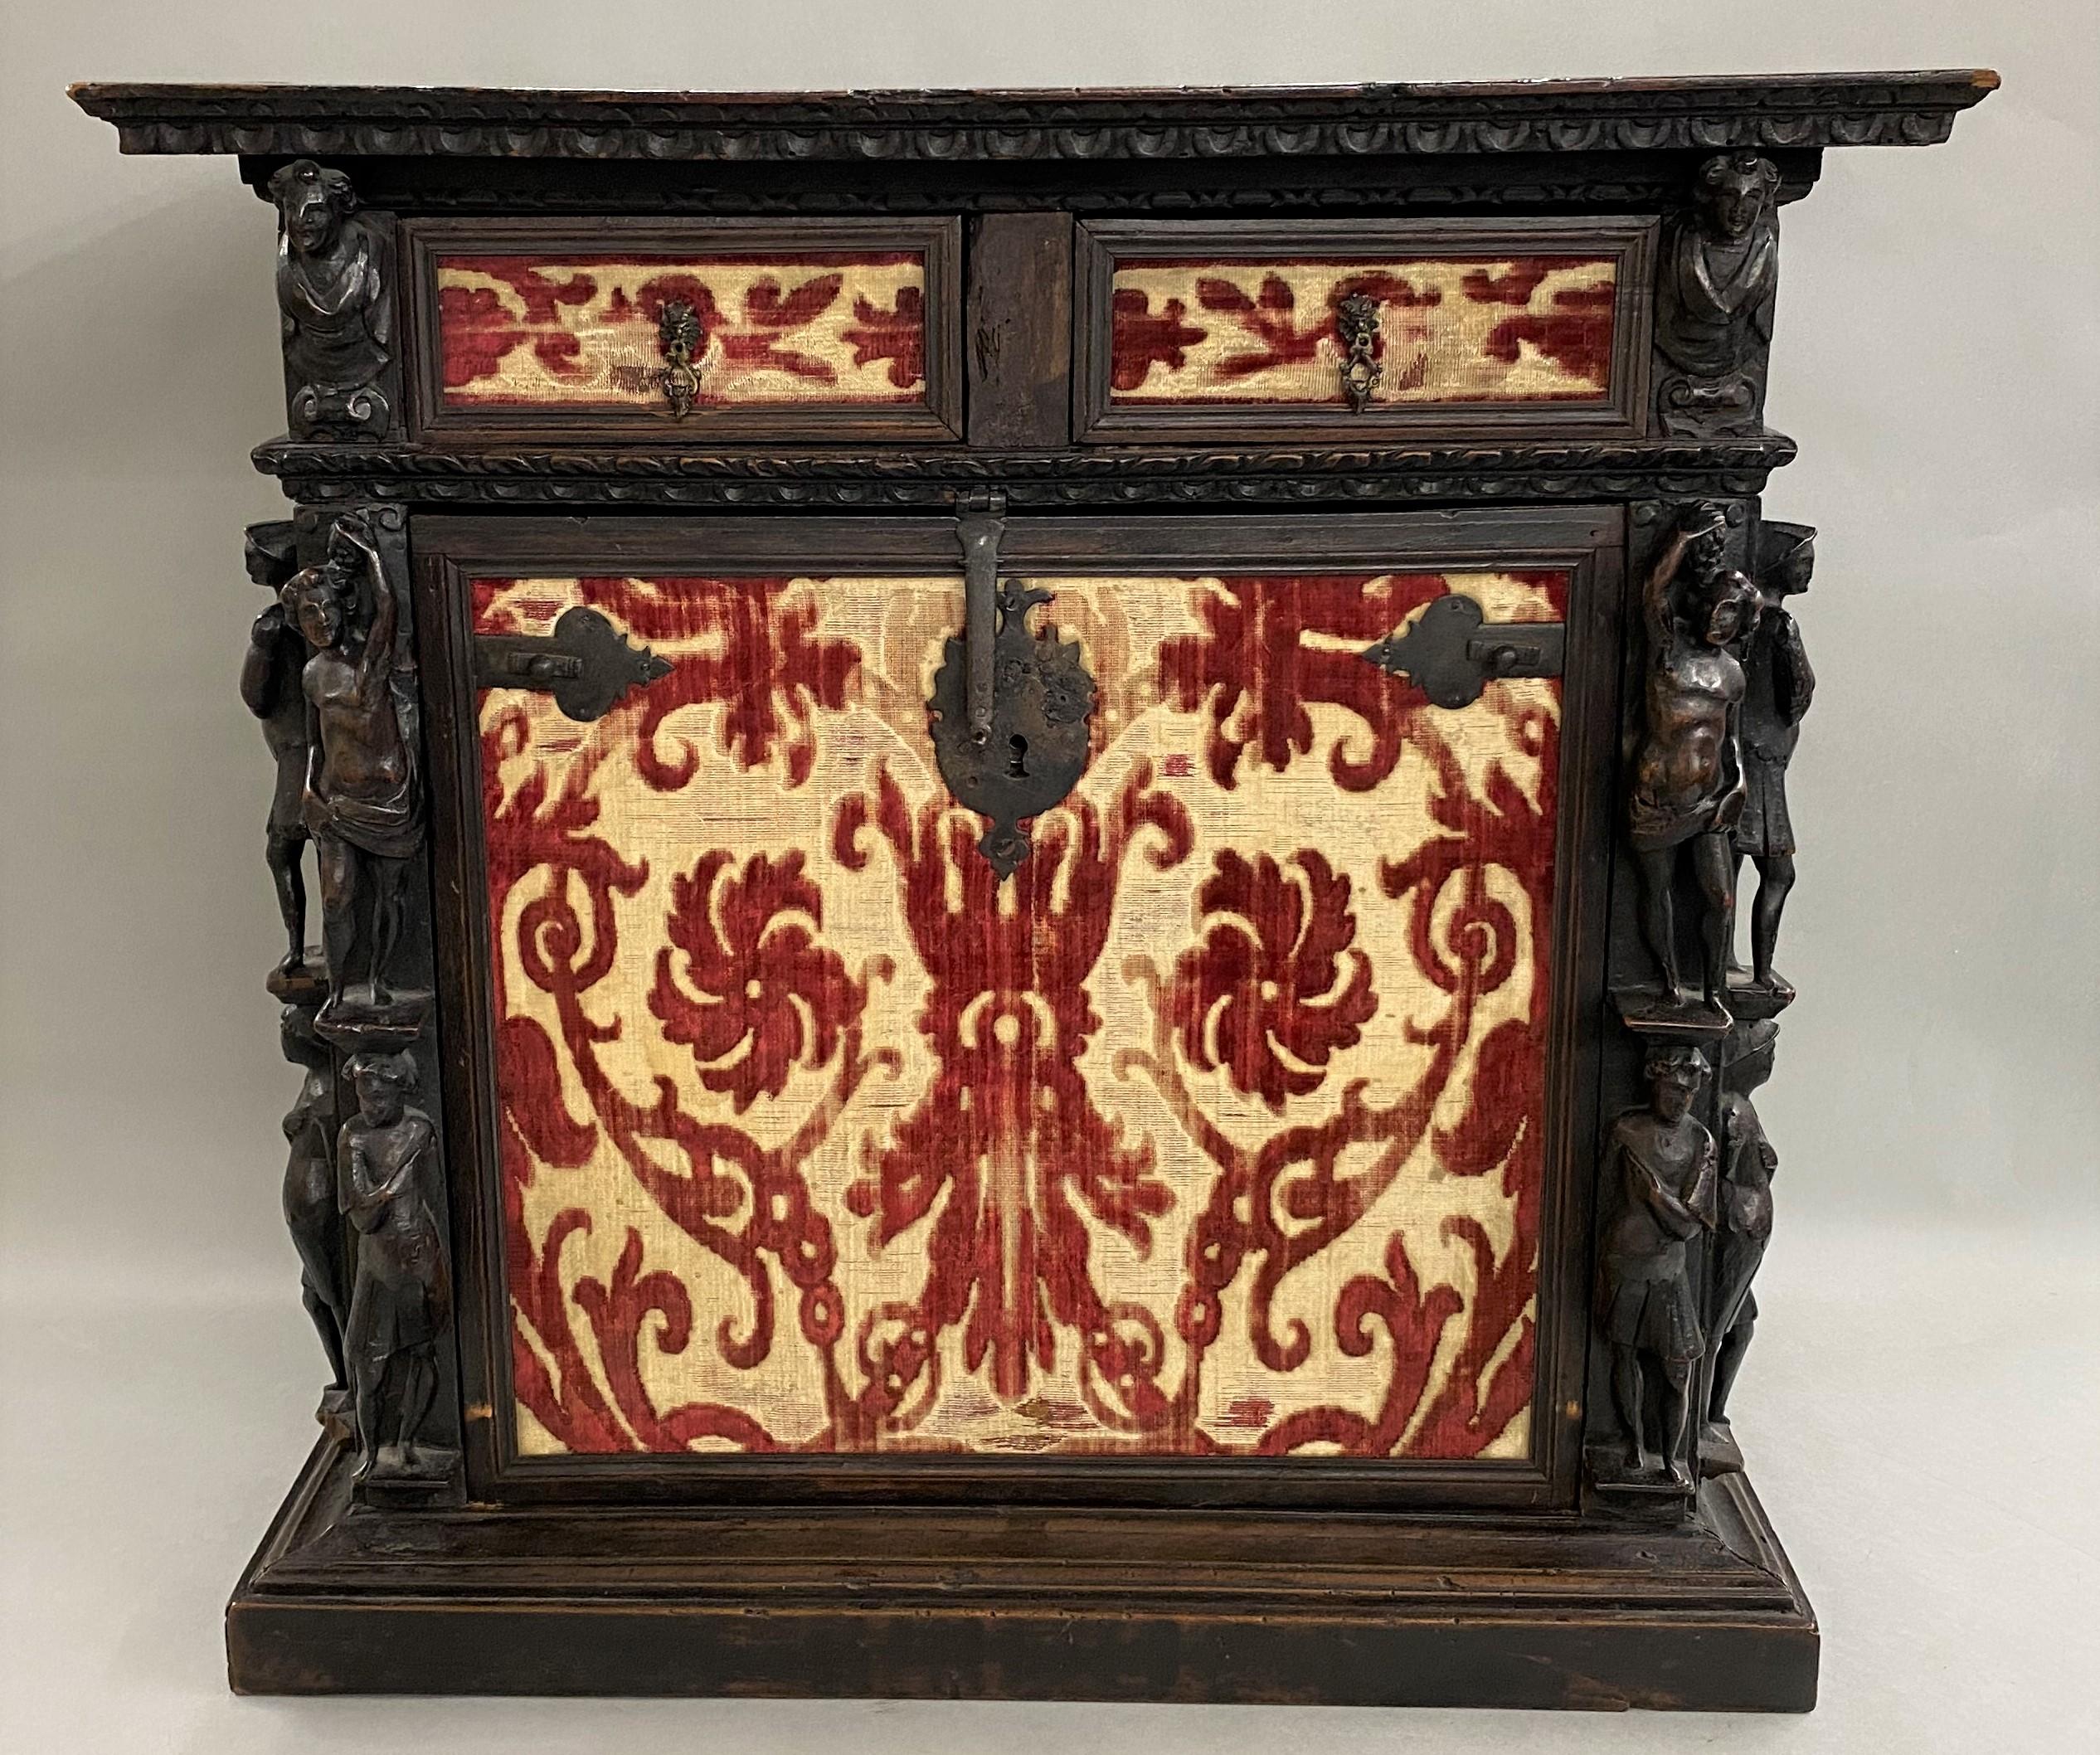 A fine example of a diminutive burled walnut vargueno, collector or valuables cabinet, with molded cornice and drop front, opening to a multi-drawer interior with two fitted upper drawers with fabric fronts surmounting a center block of drawers,